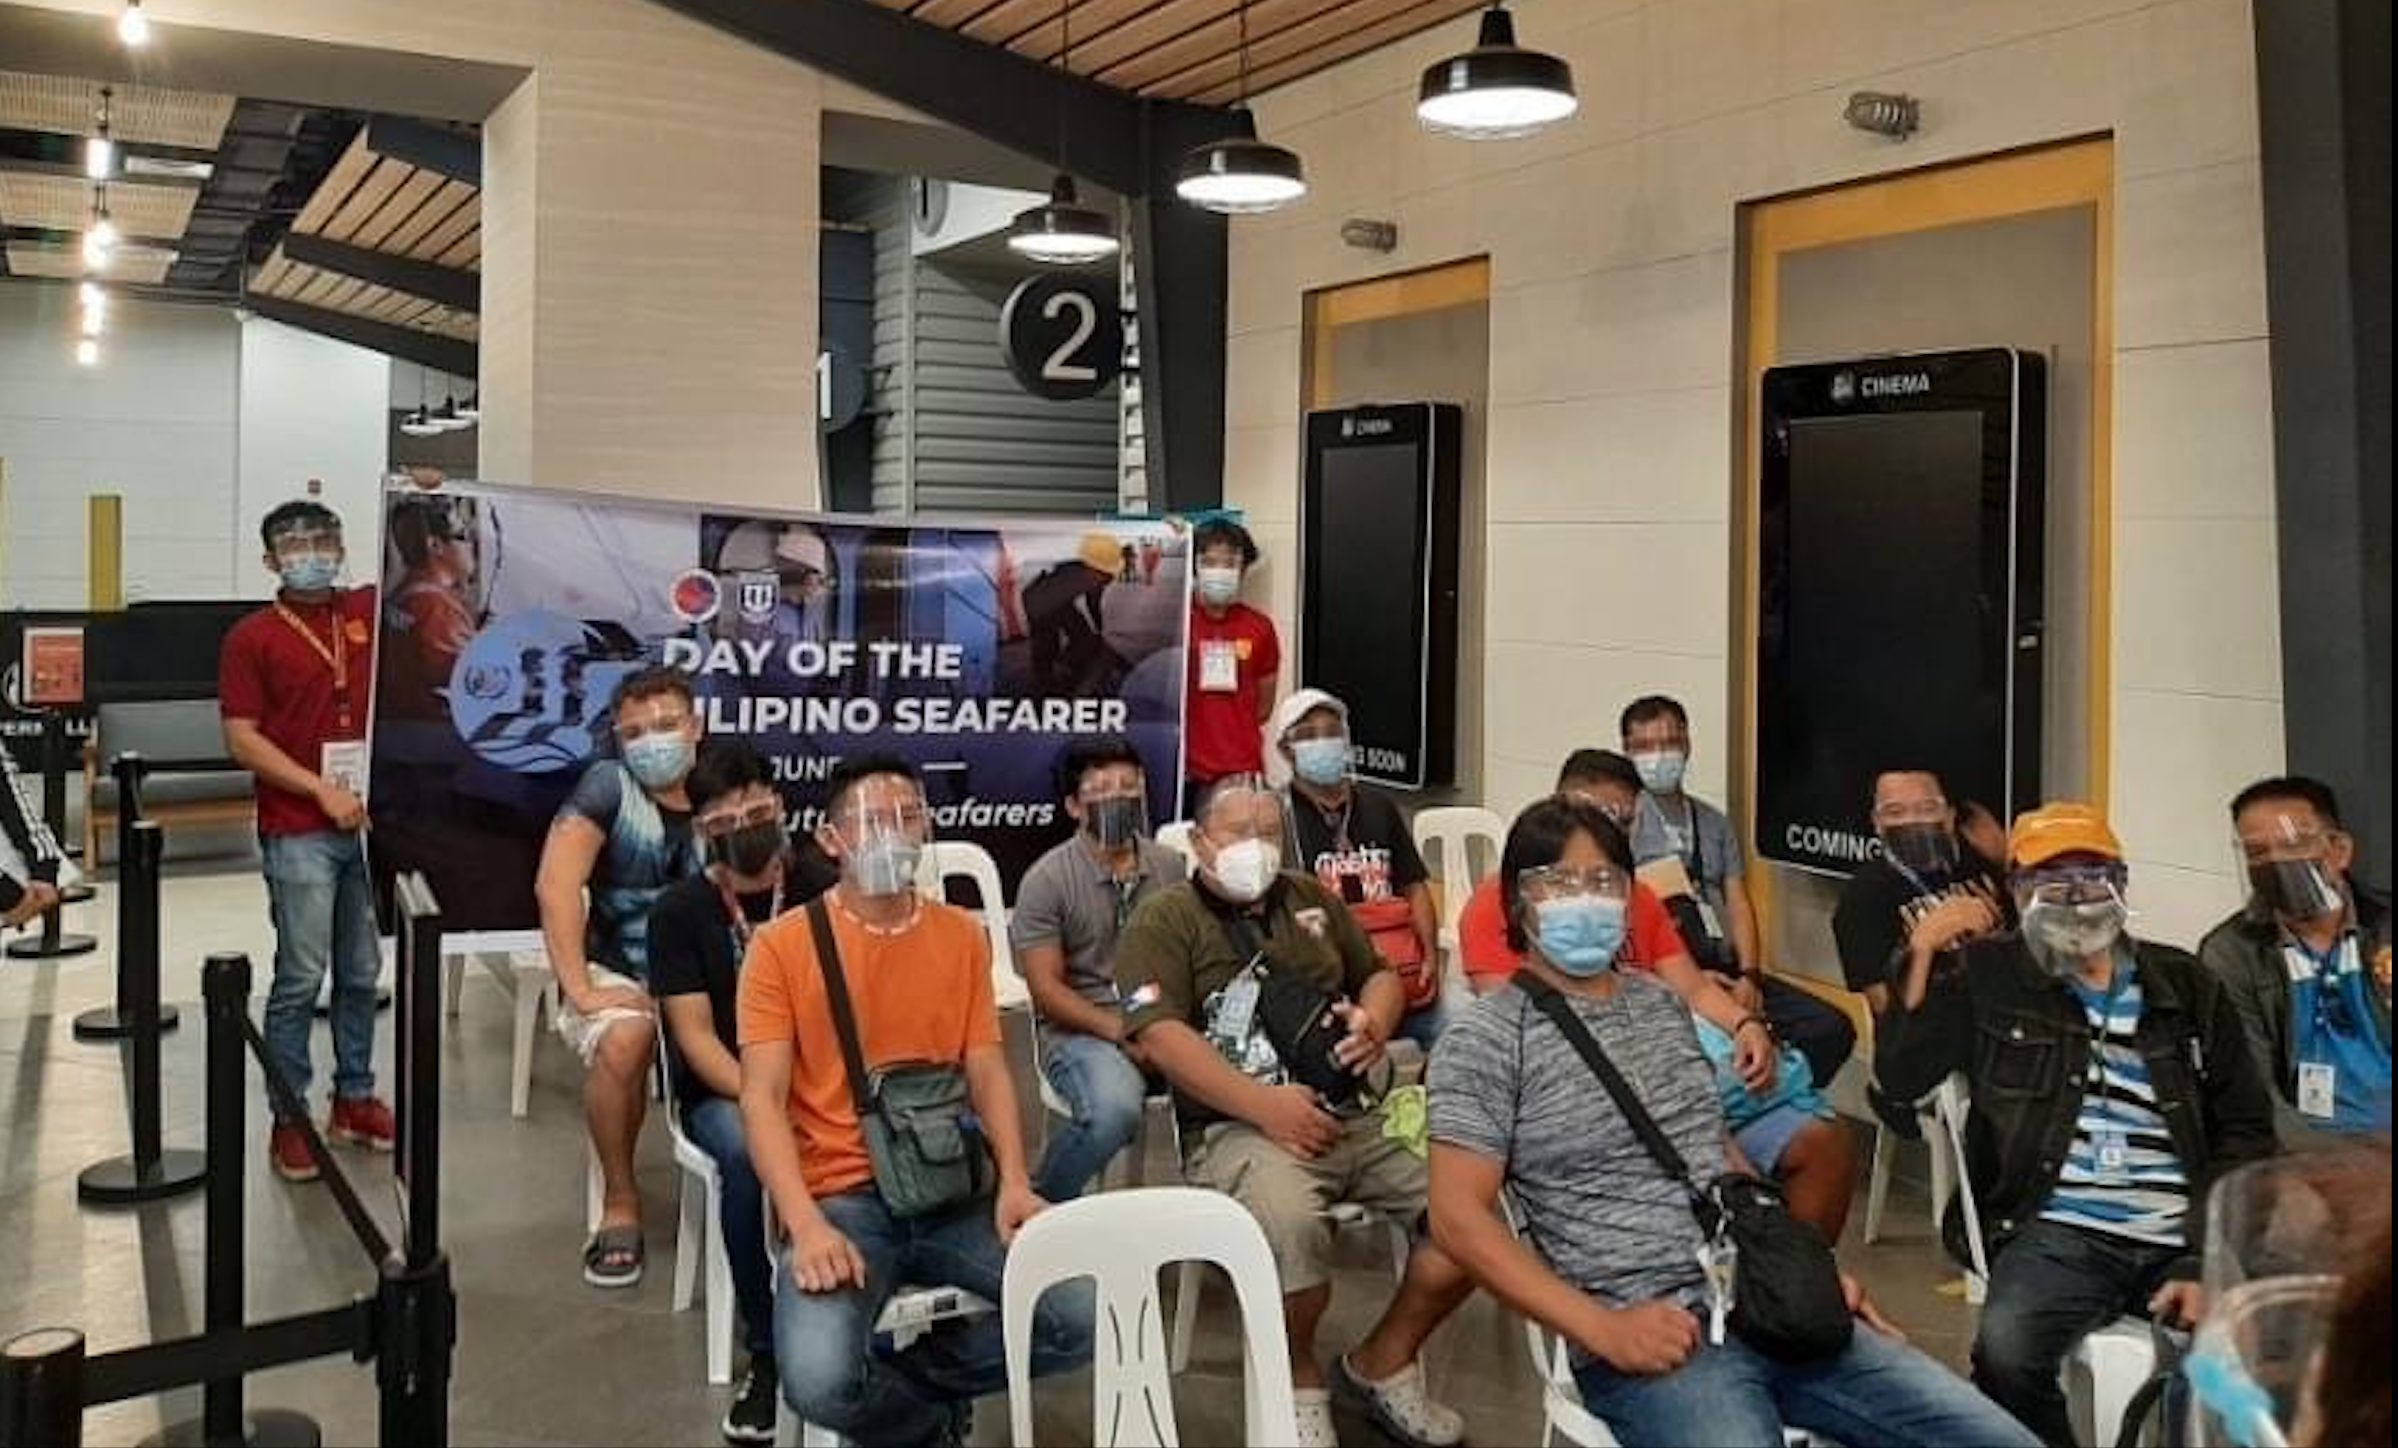 With livelihood at stake, Philippine pushes to vaccinate all seafarers